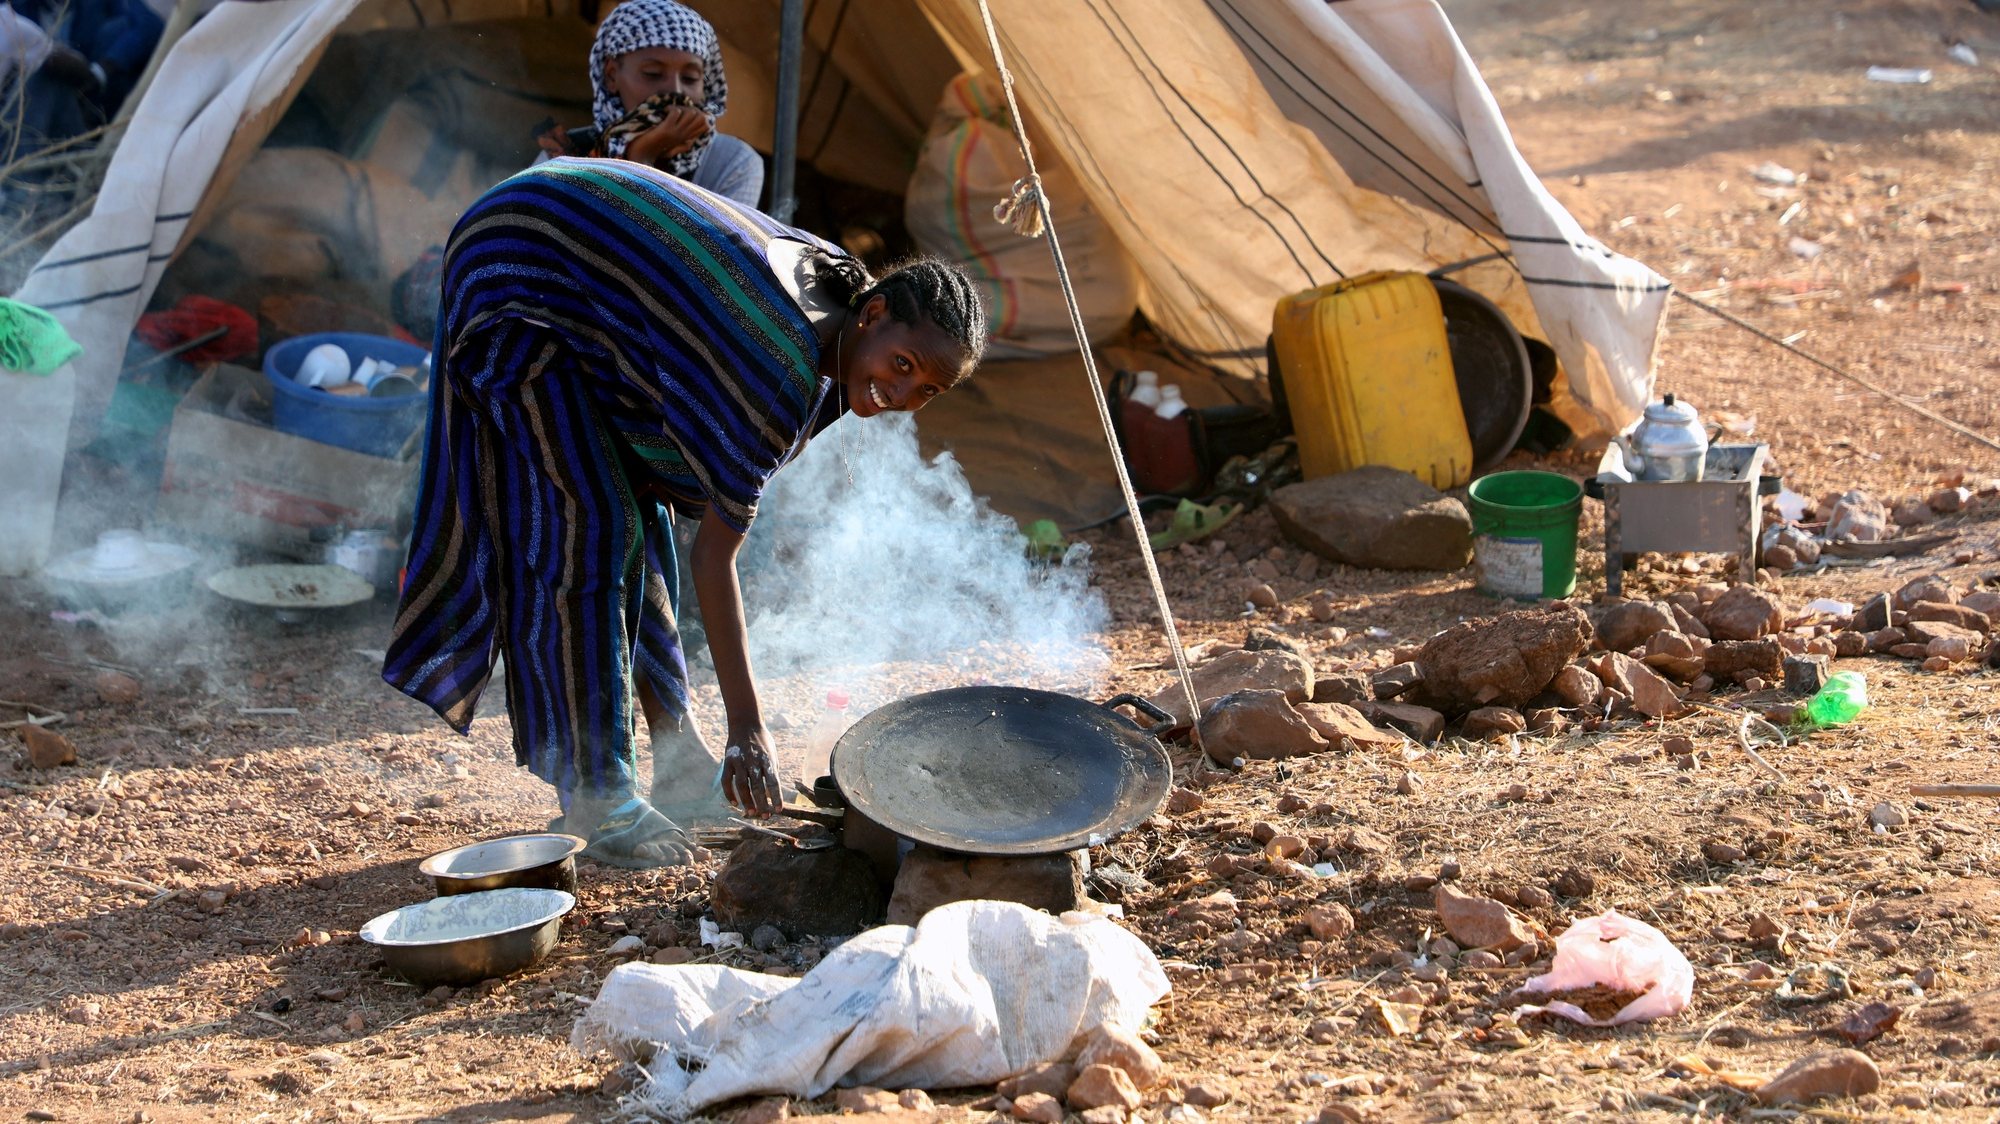 epa08849891 A woman preparing a meal outside her temporary shelter at Um Rakuba refugee camp in the state of al-Qadarif (also known as Gedaref), Sudan, 28 November 2020. The number of refugees in this camp reached nearly 10,000 refugees who crossed the border from Ethiopia to Sudan to escape the conflict in Tigray region of Ethiopia.  EPA/MOHAMMED ABU OBAID